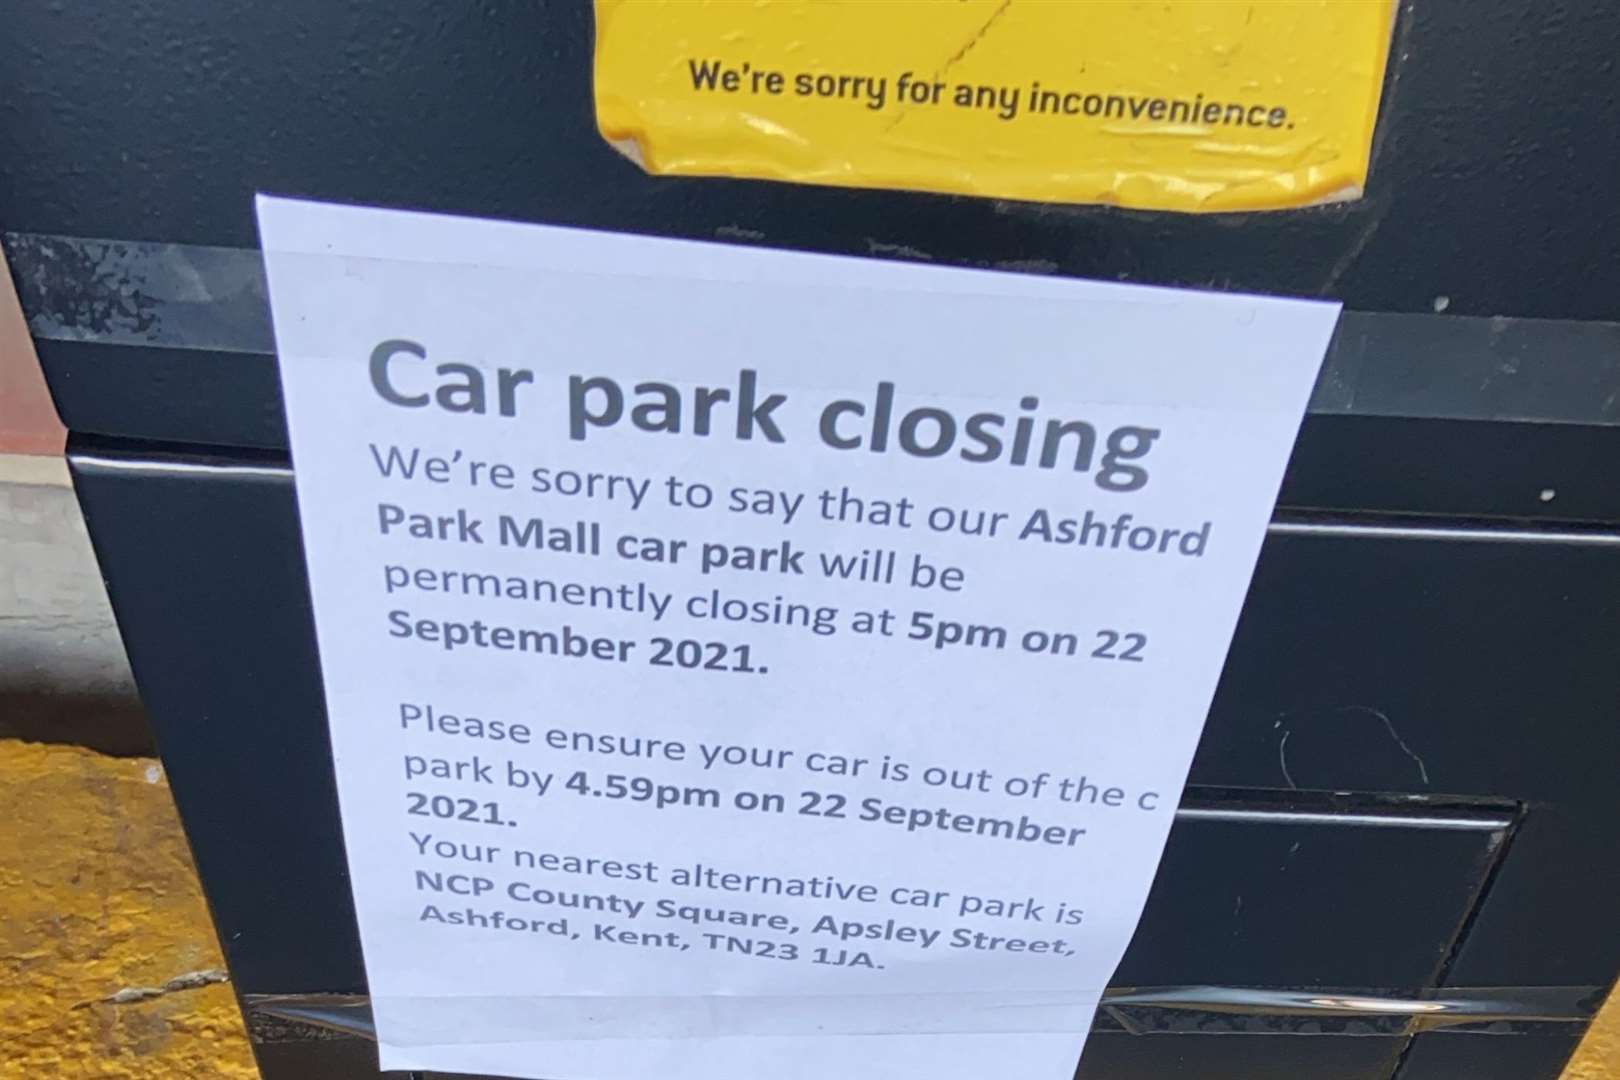 Signs appeared on the ticket machines overnight